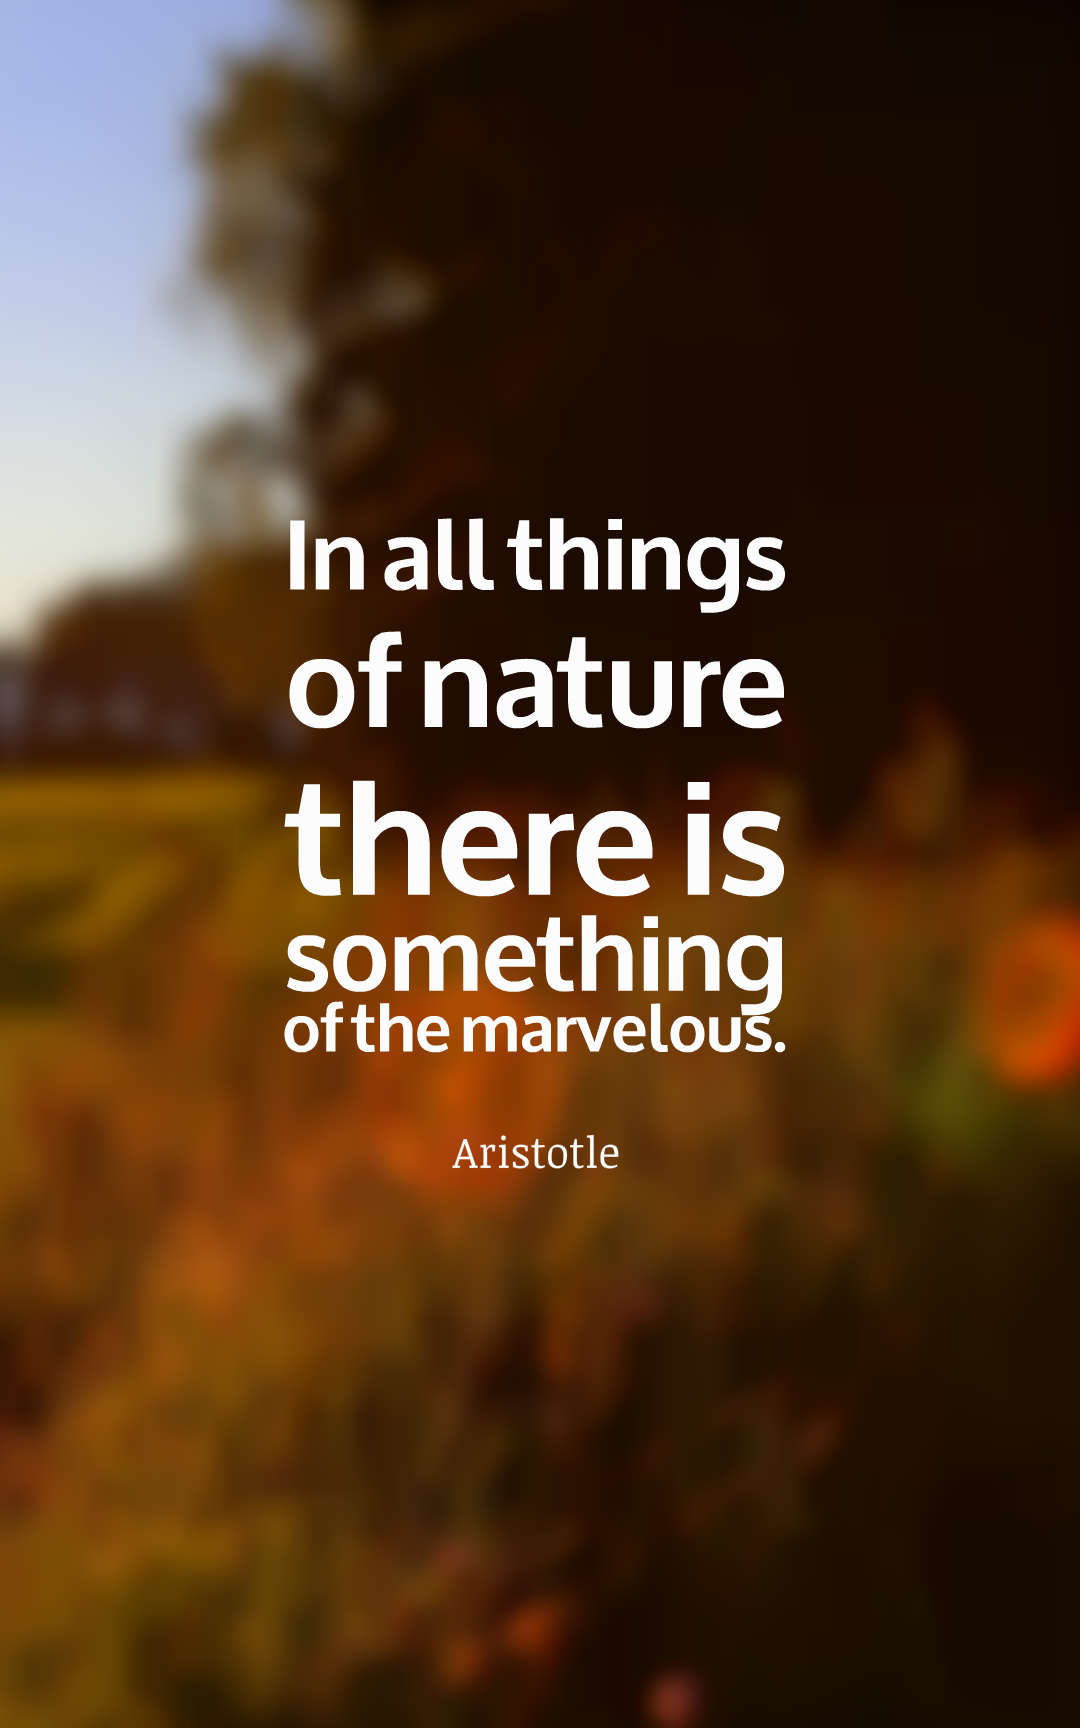 In all things of nature there is something of the marvelous.